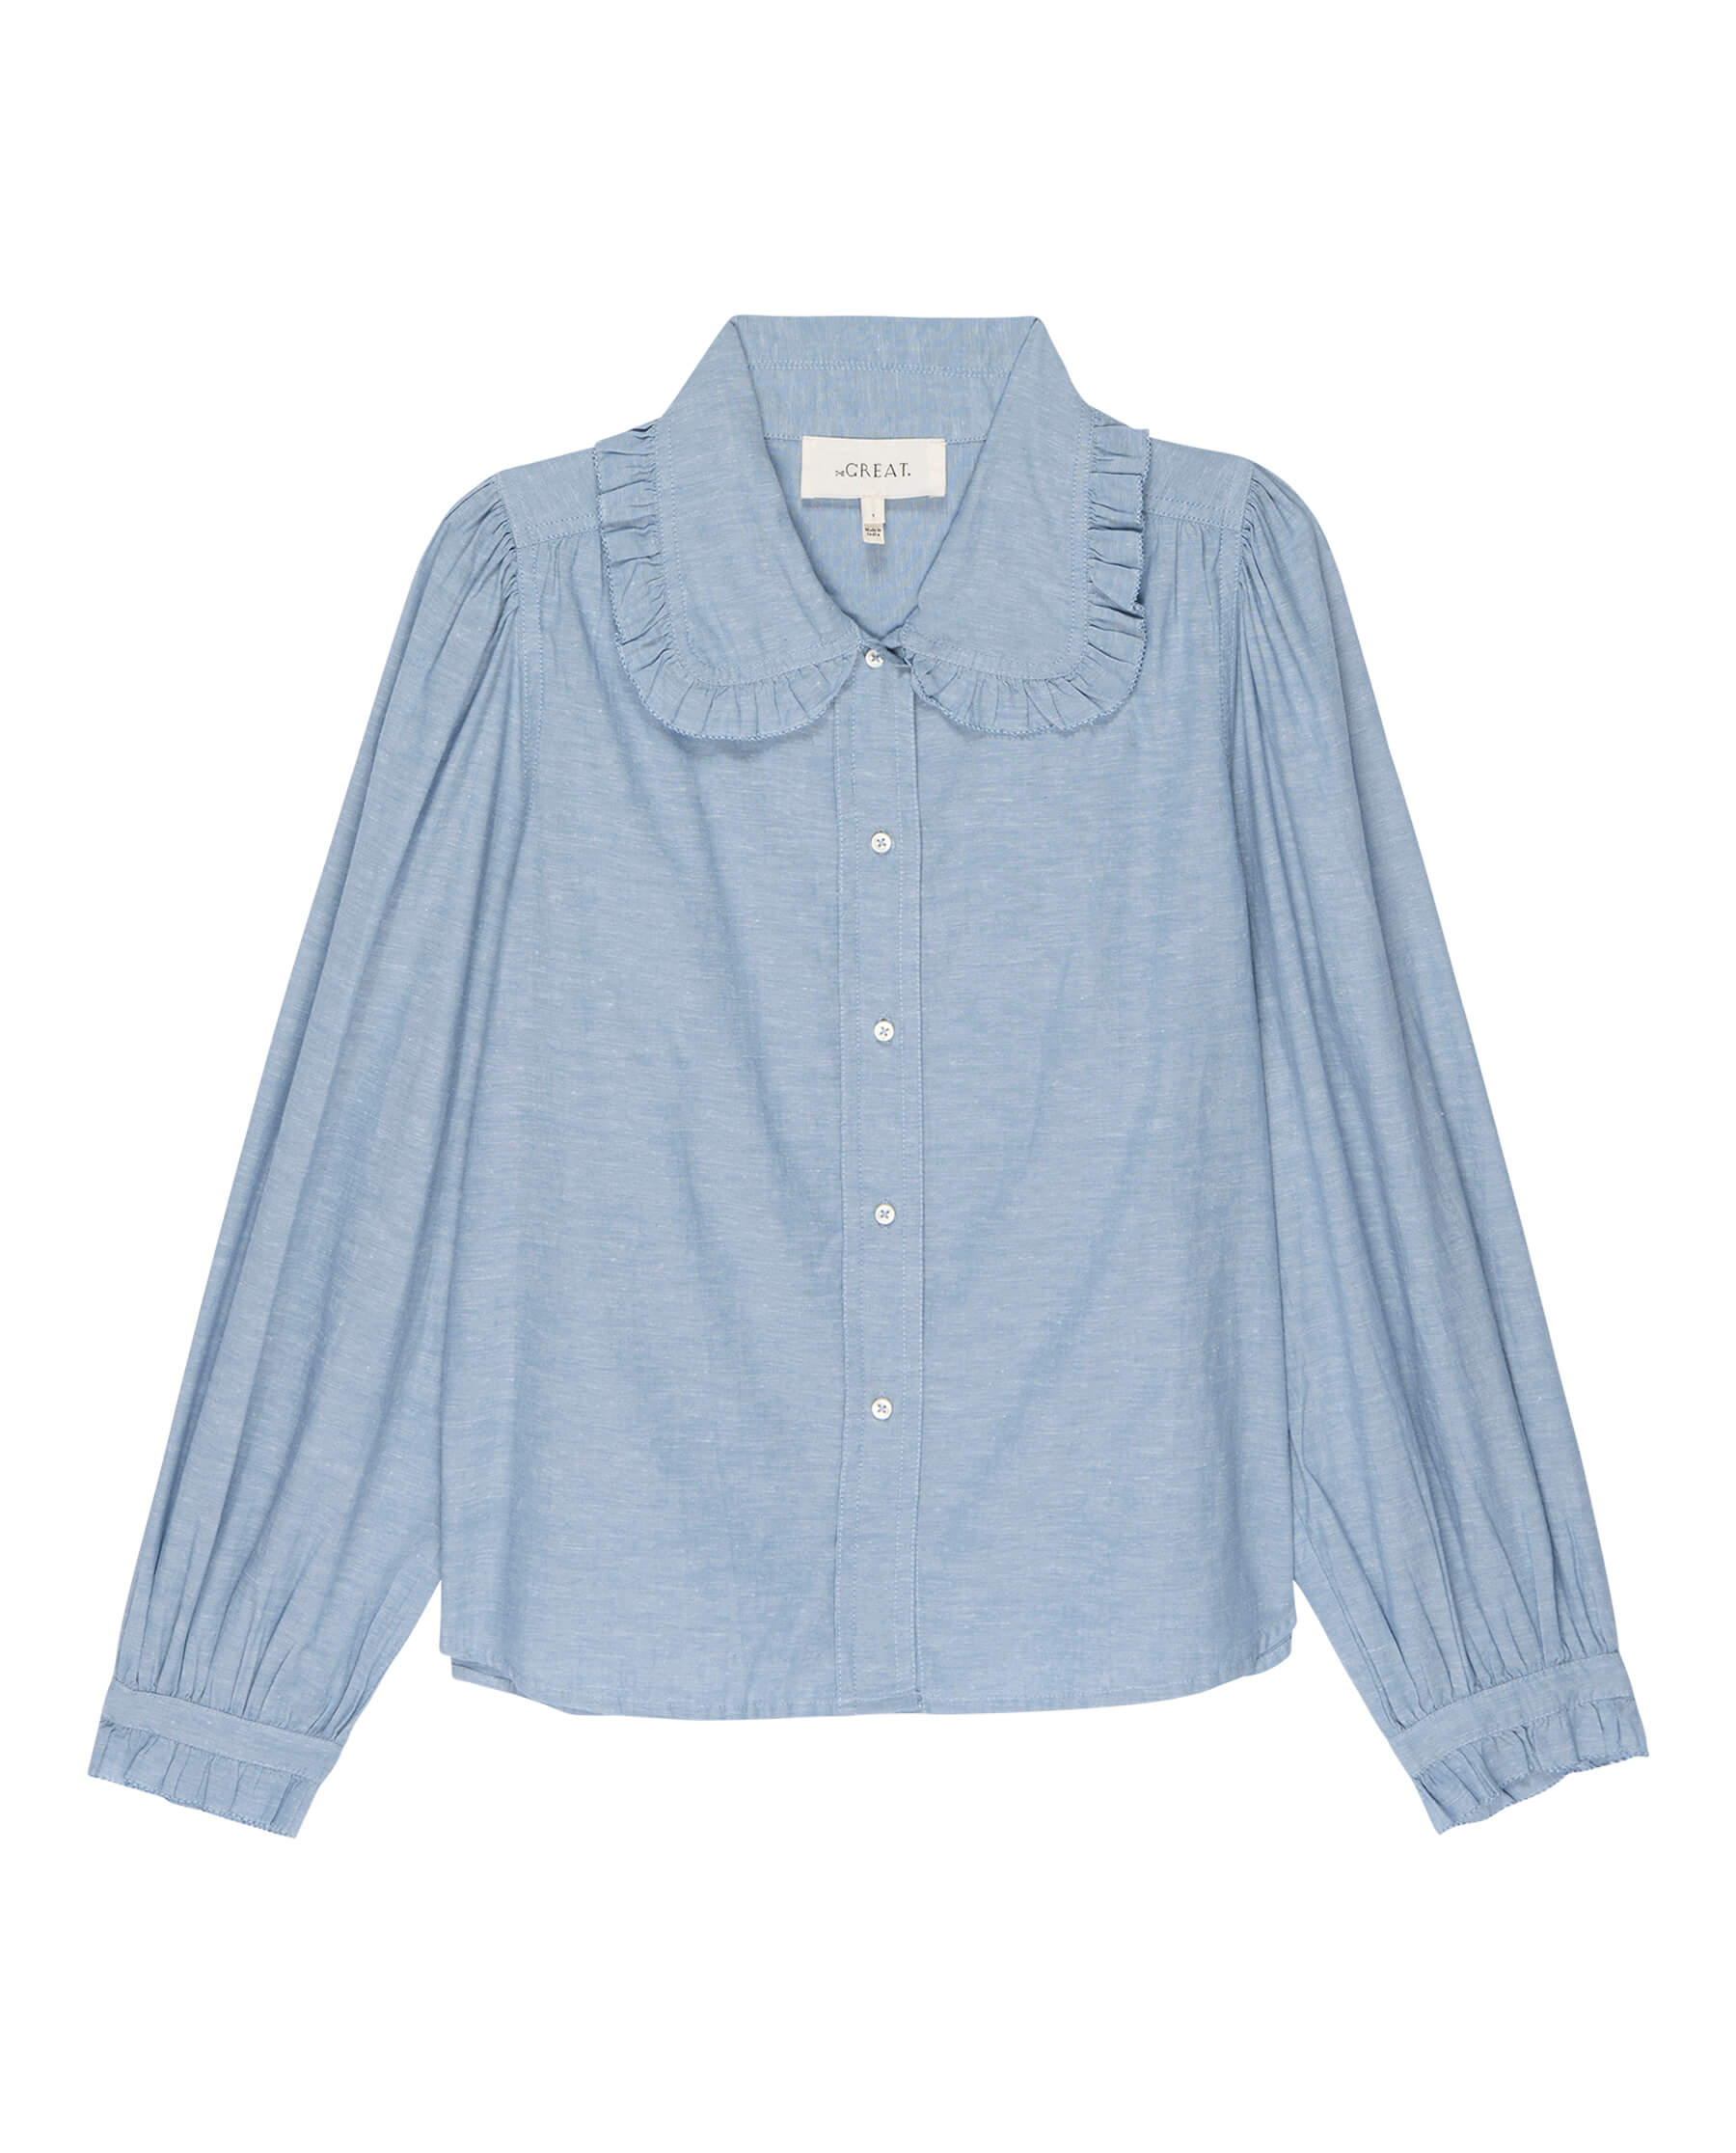 The Hemmingway Top. -- Light Chambray SHIRTS THE GREAT. SP23 D1